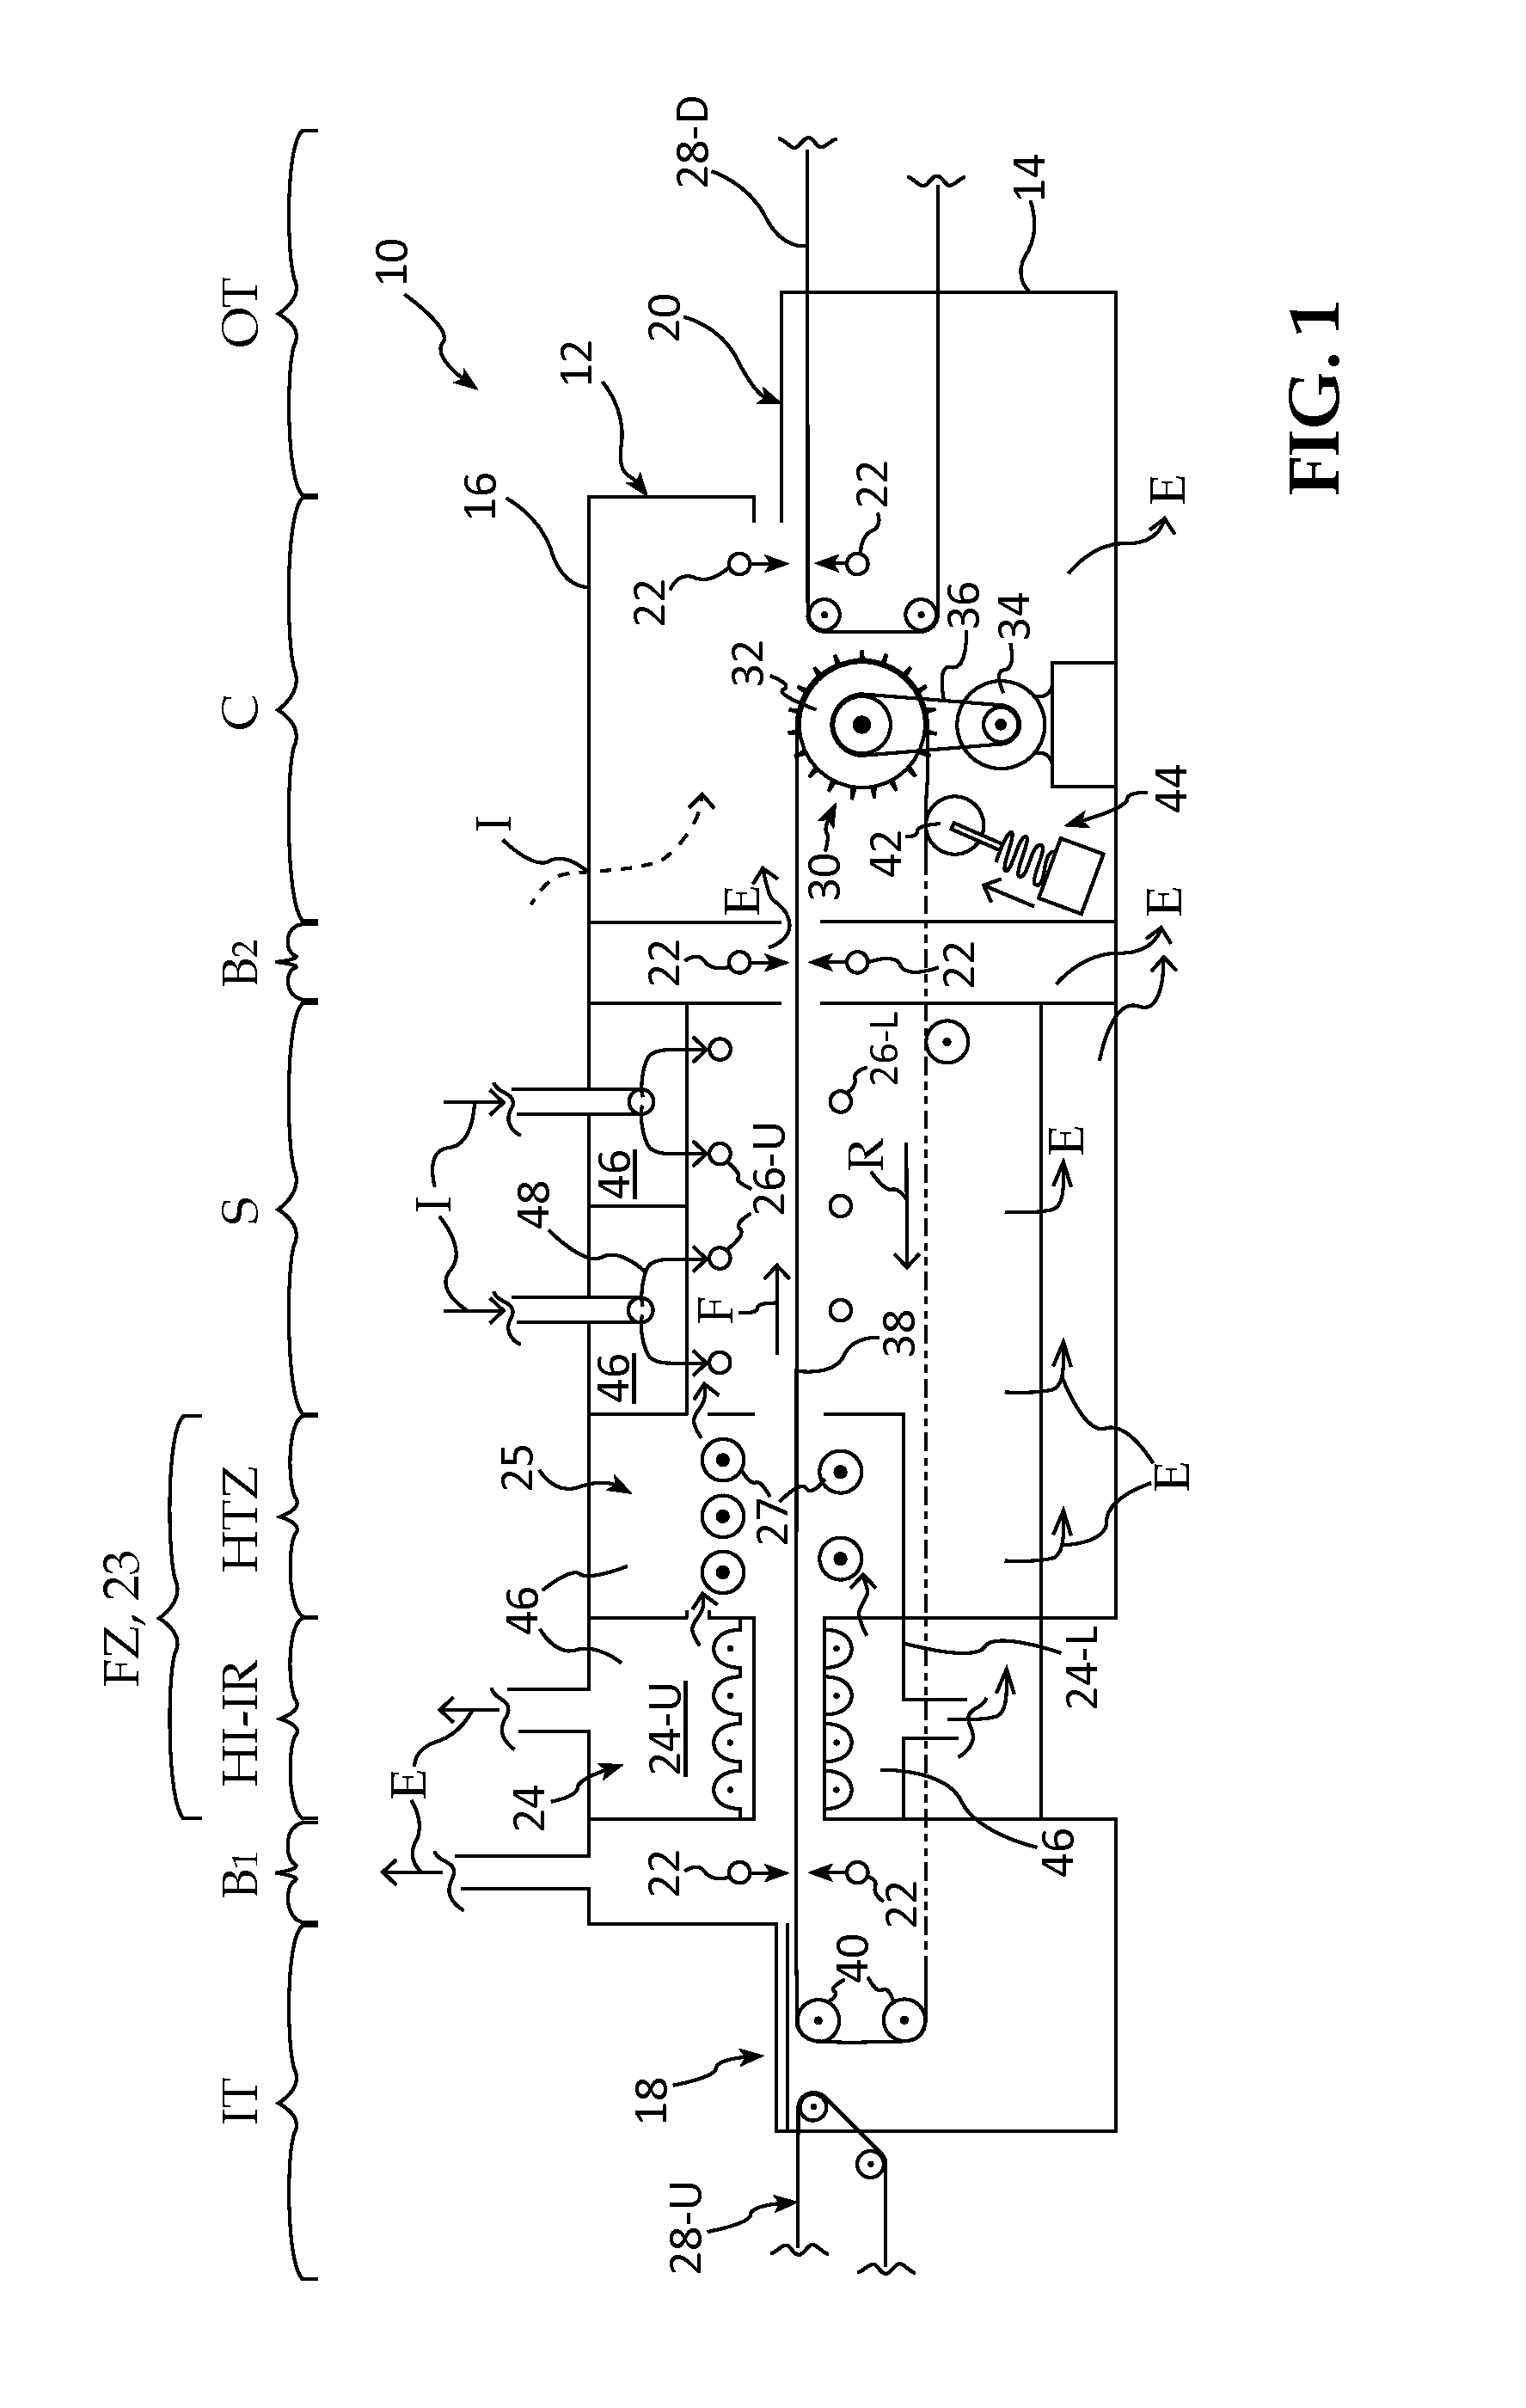 Diffusion Furnaces Employing Ultra Low Mass Transport Systems and Methods of Wafer Rapid Diffusion Processing